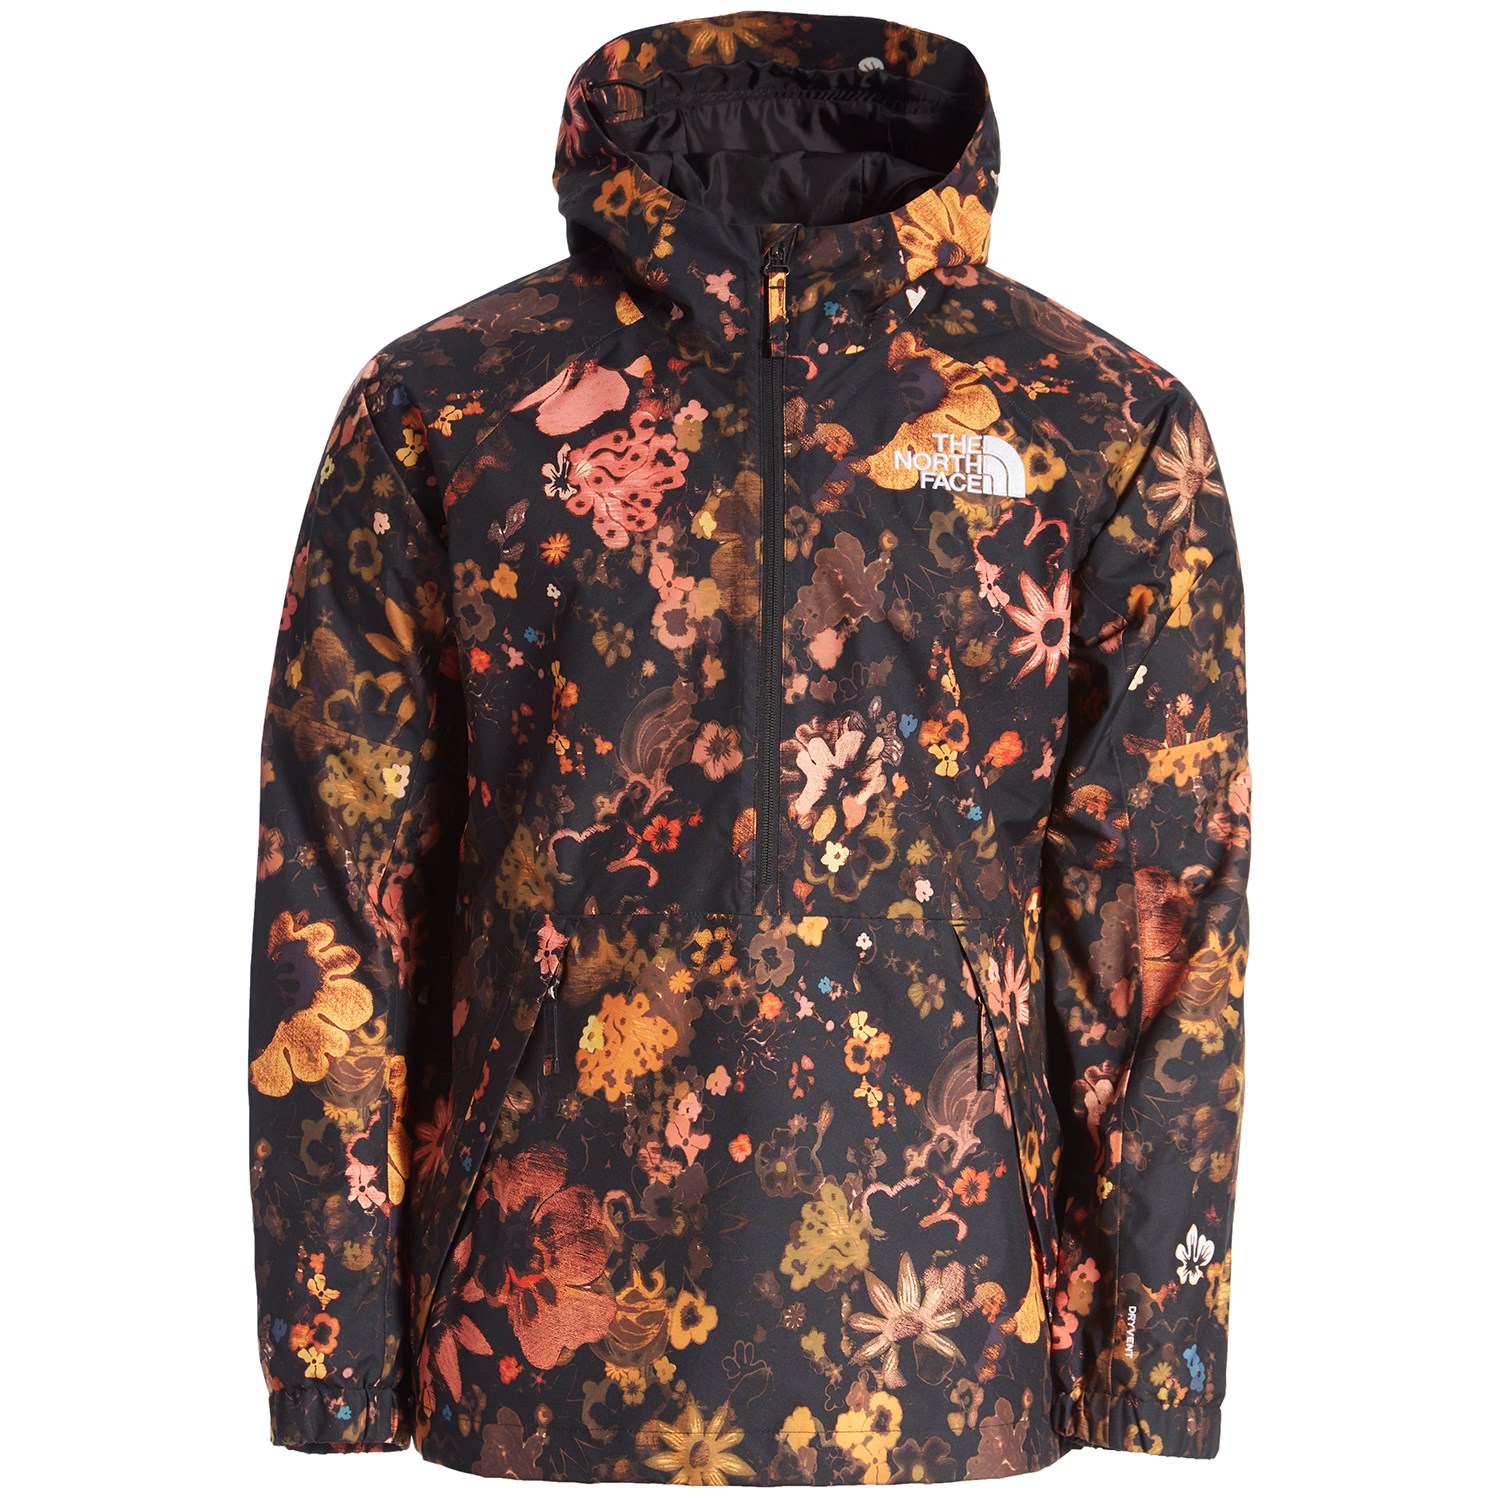 The North Face Up & Over Anorak | evo